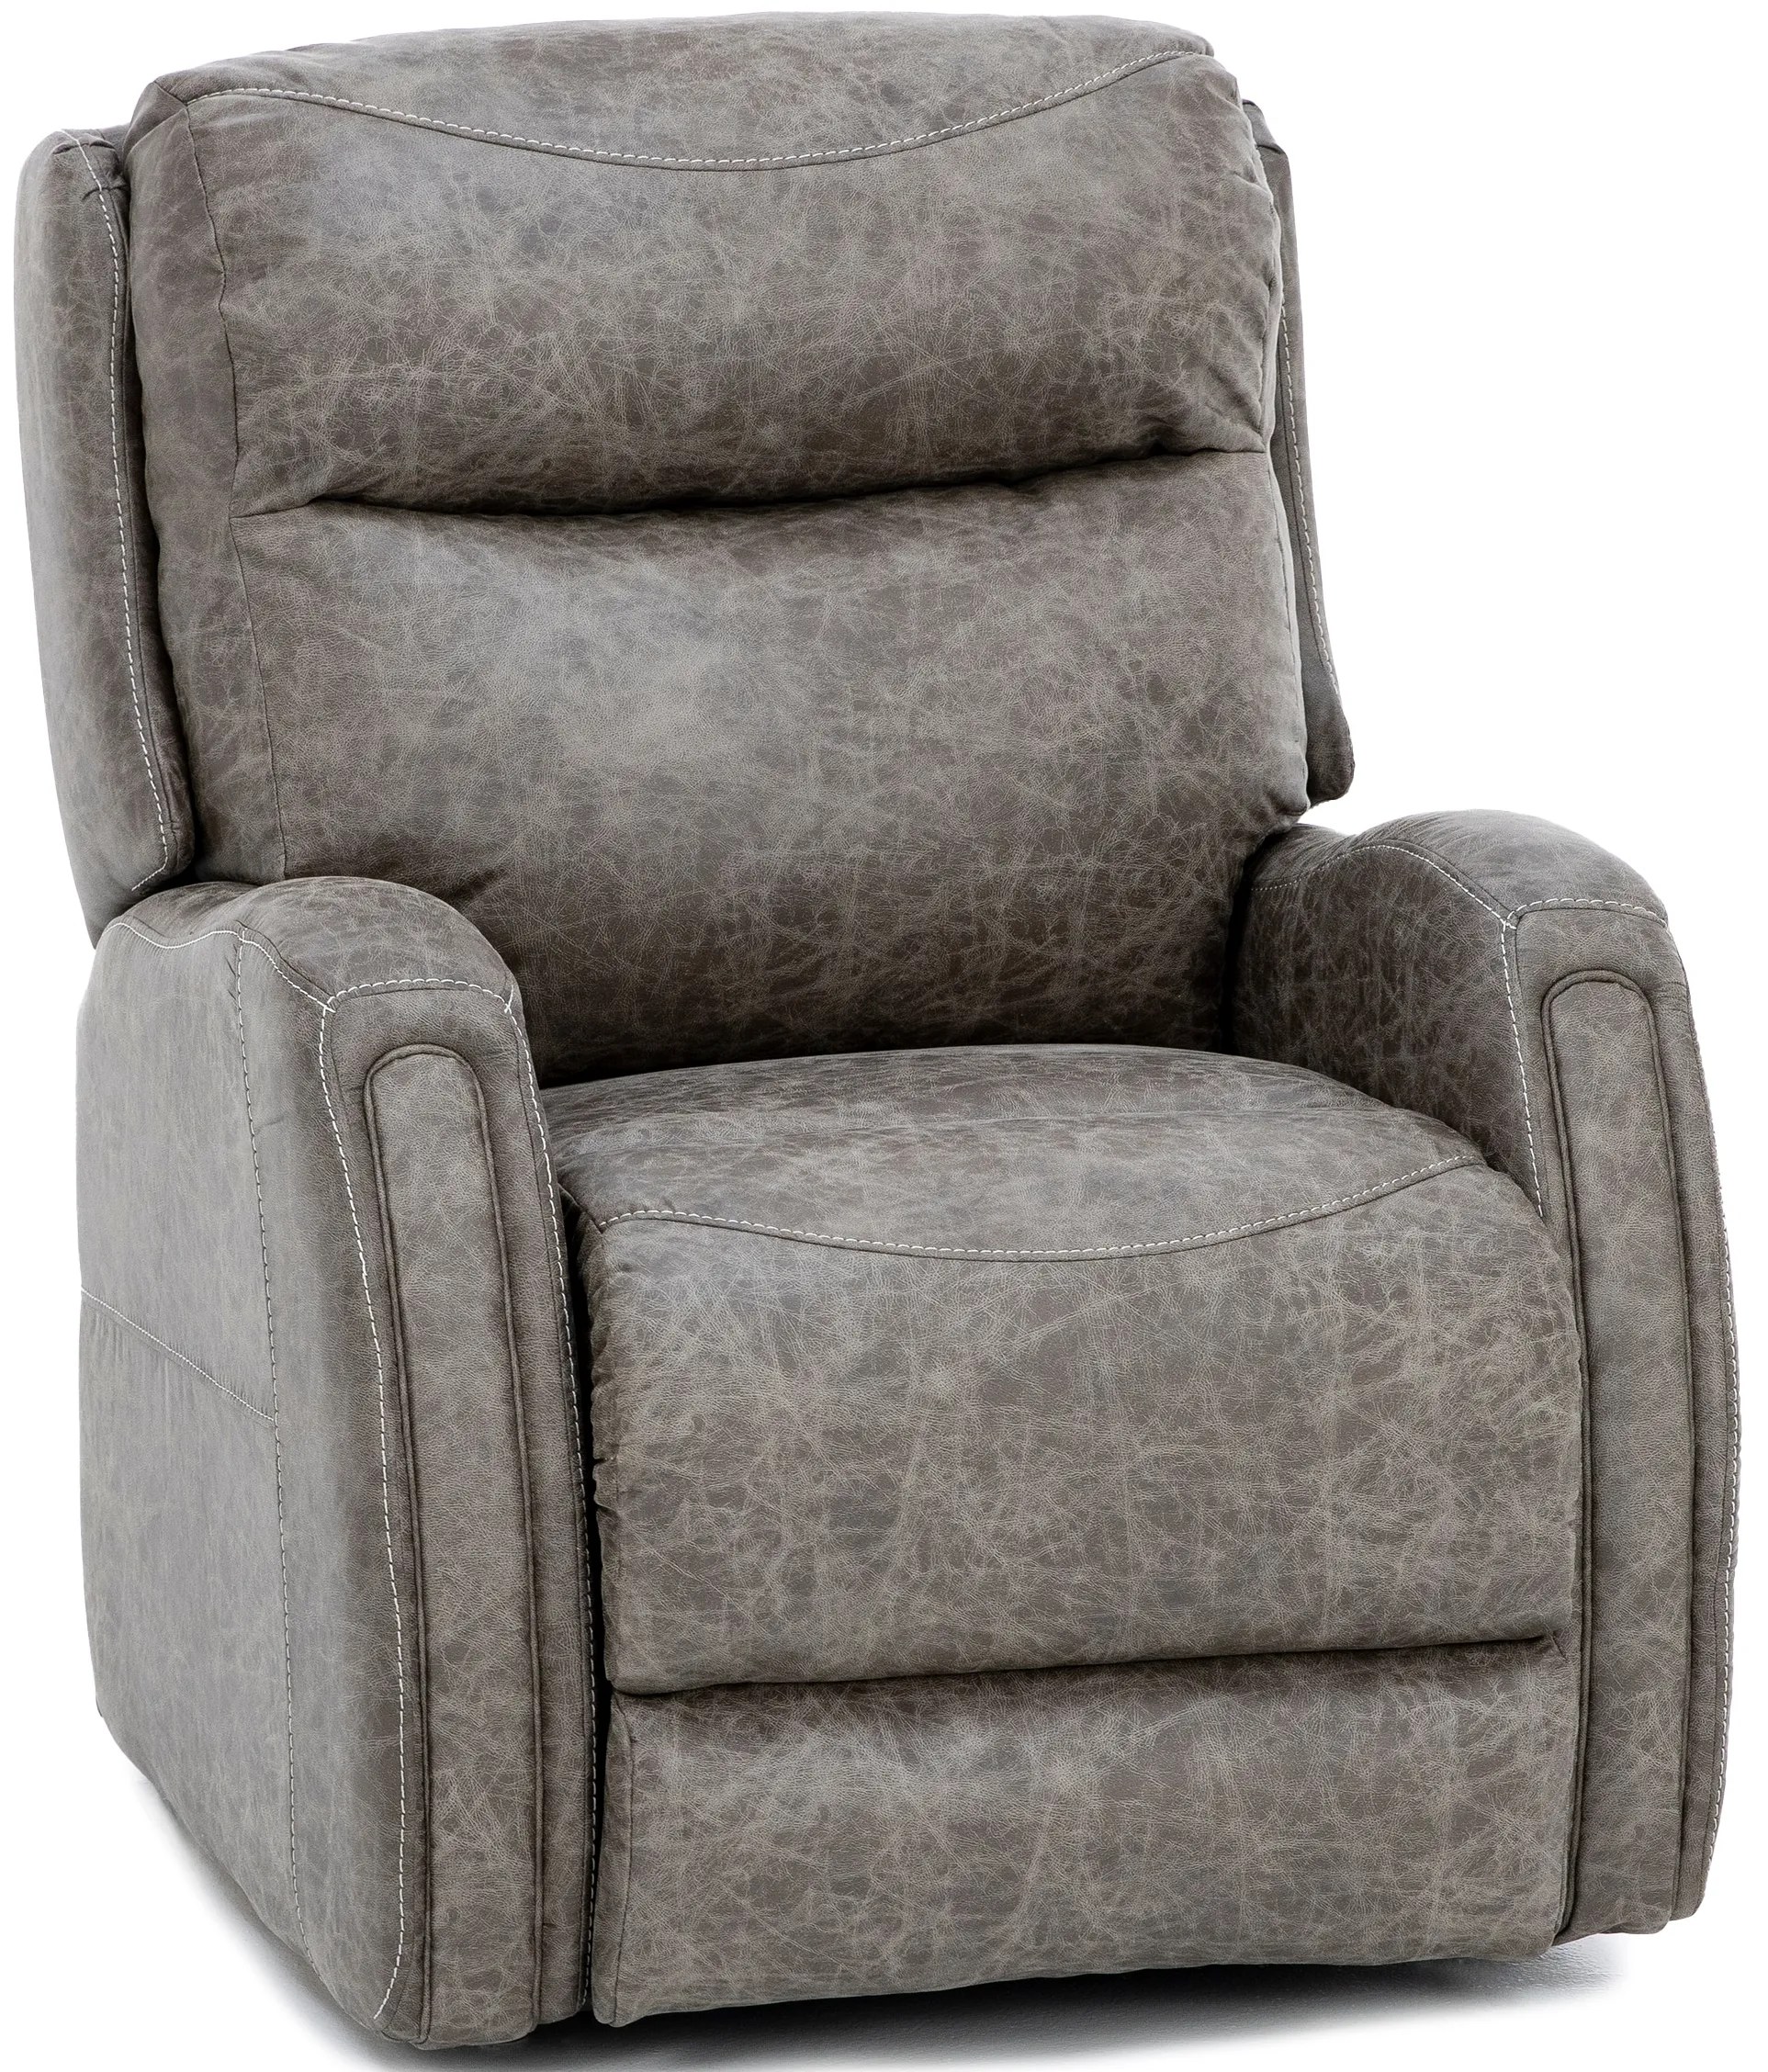 Cambridge Fully Loaded Lift Chair in Dove